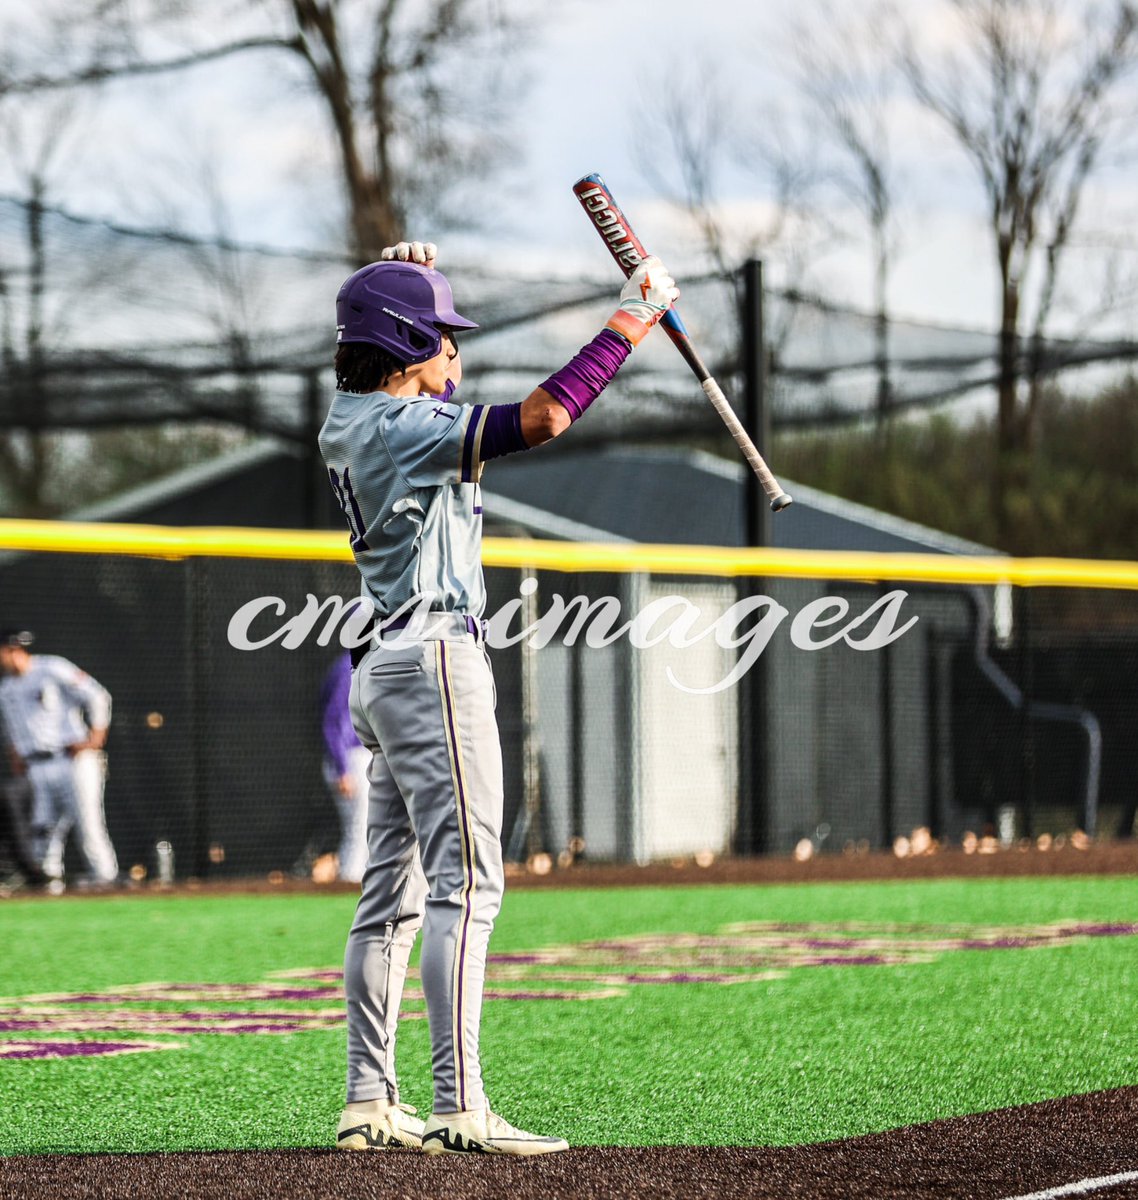 “CBC vs. Eureka” The game day 📸 gallery is now posted at cmsimages.pixieset.com All follows, reposts & likes are greatly appreciated! @CBCHighSchool @cbccadets @cadetbaseball @cbchsbaseball @EHSActivityDir @Eureka_Strong @EurekaCats @MetroSportsSTL @scoreboardguy @TBHSTrojans